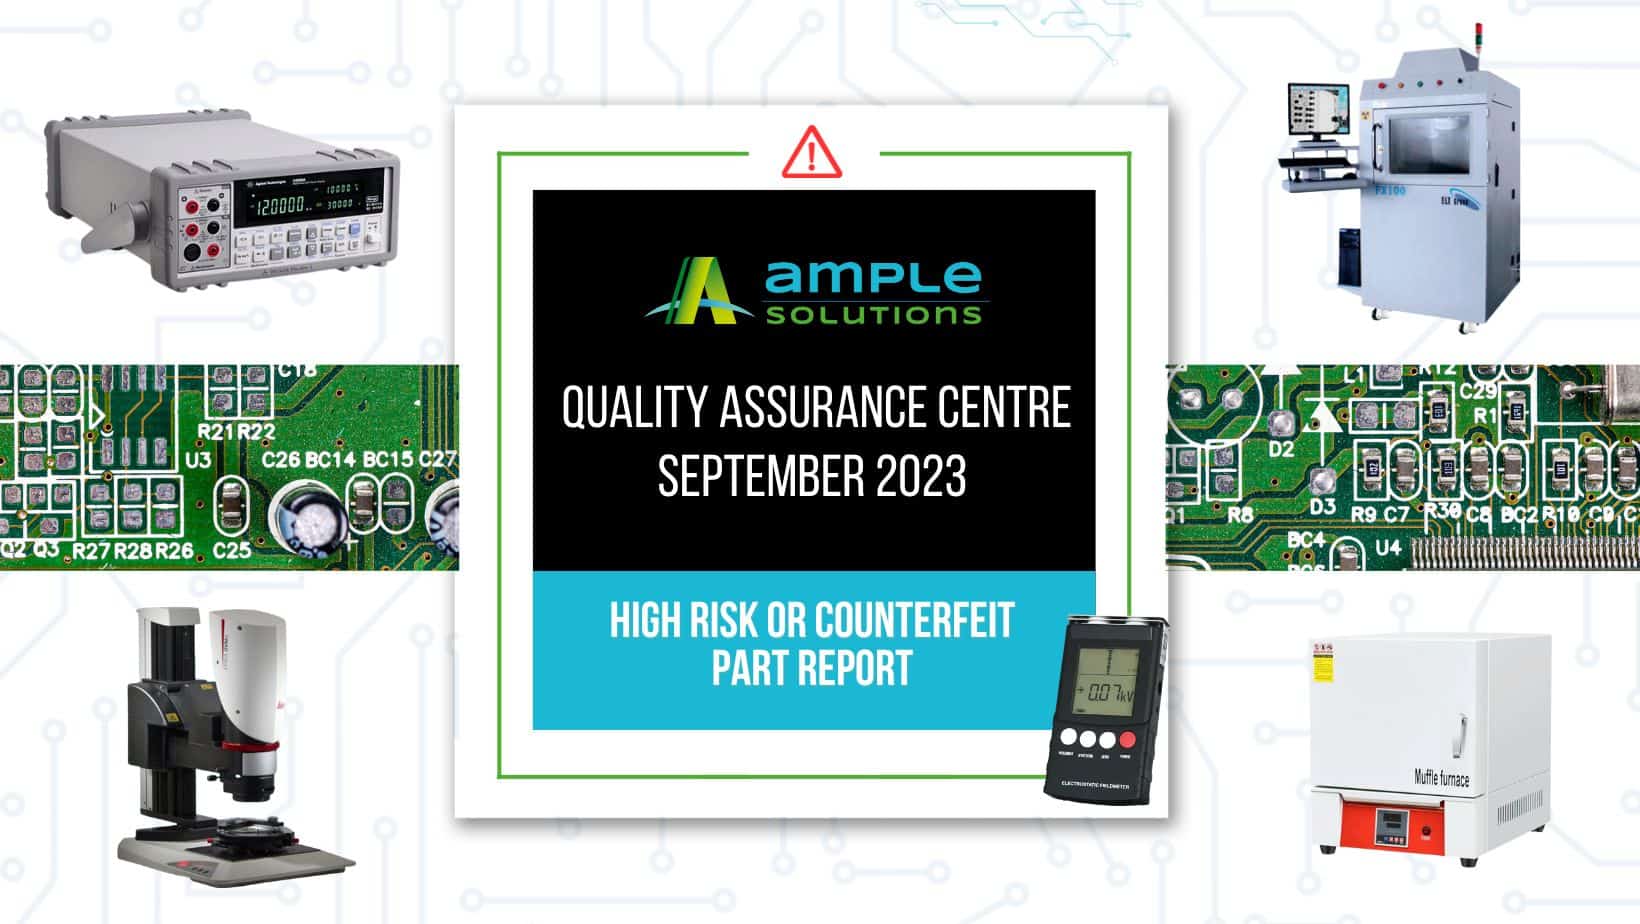 High-risk or Counterfeit Electronic Components: Ample Solutions Quality Assurance Centre September 2023 Report